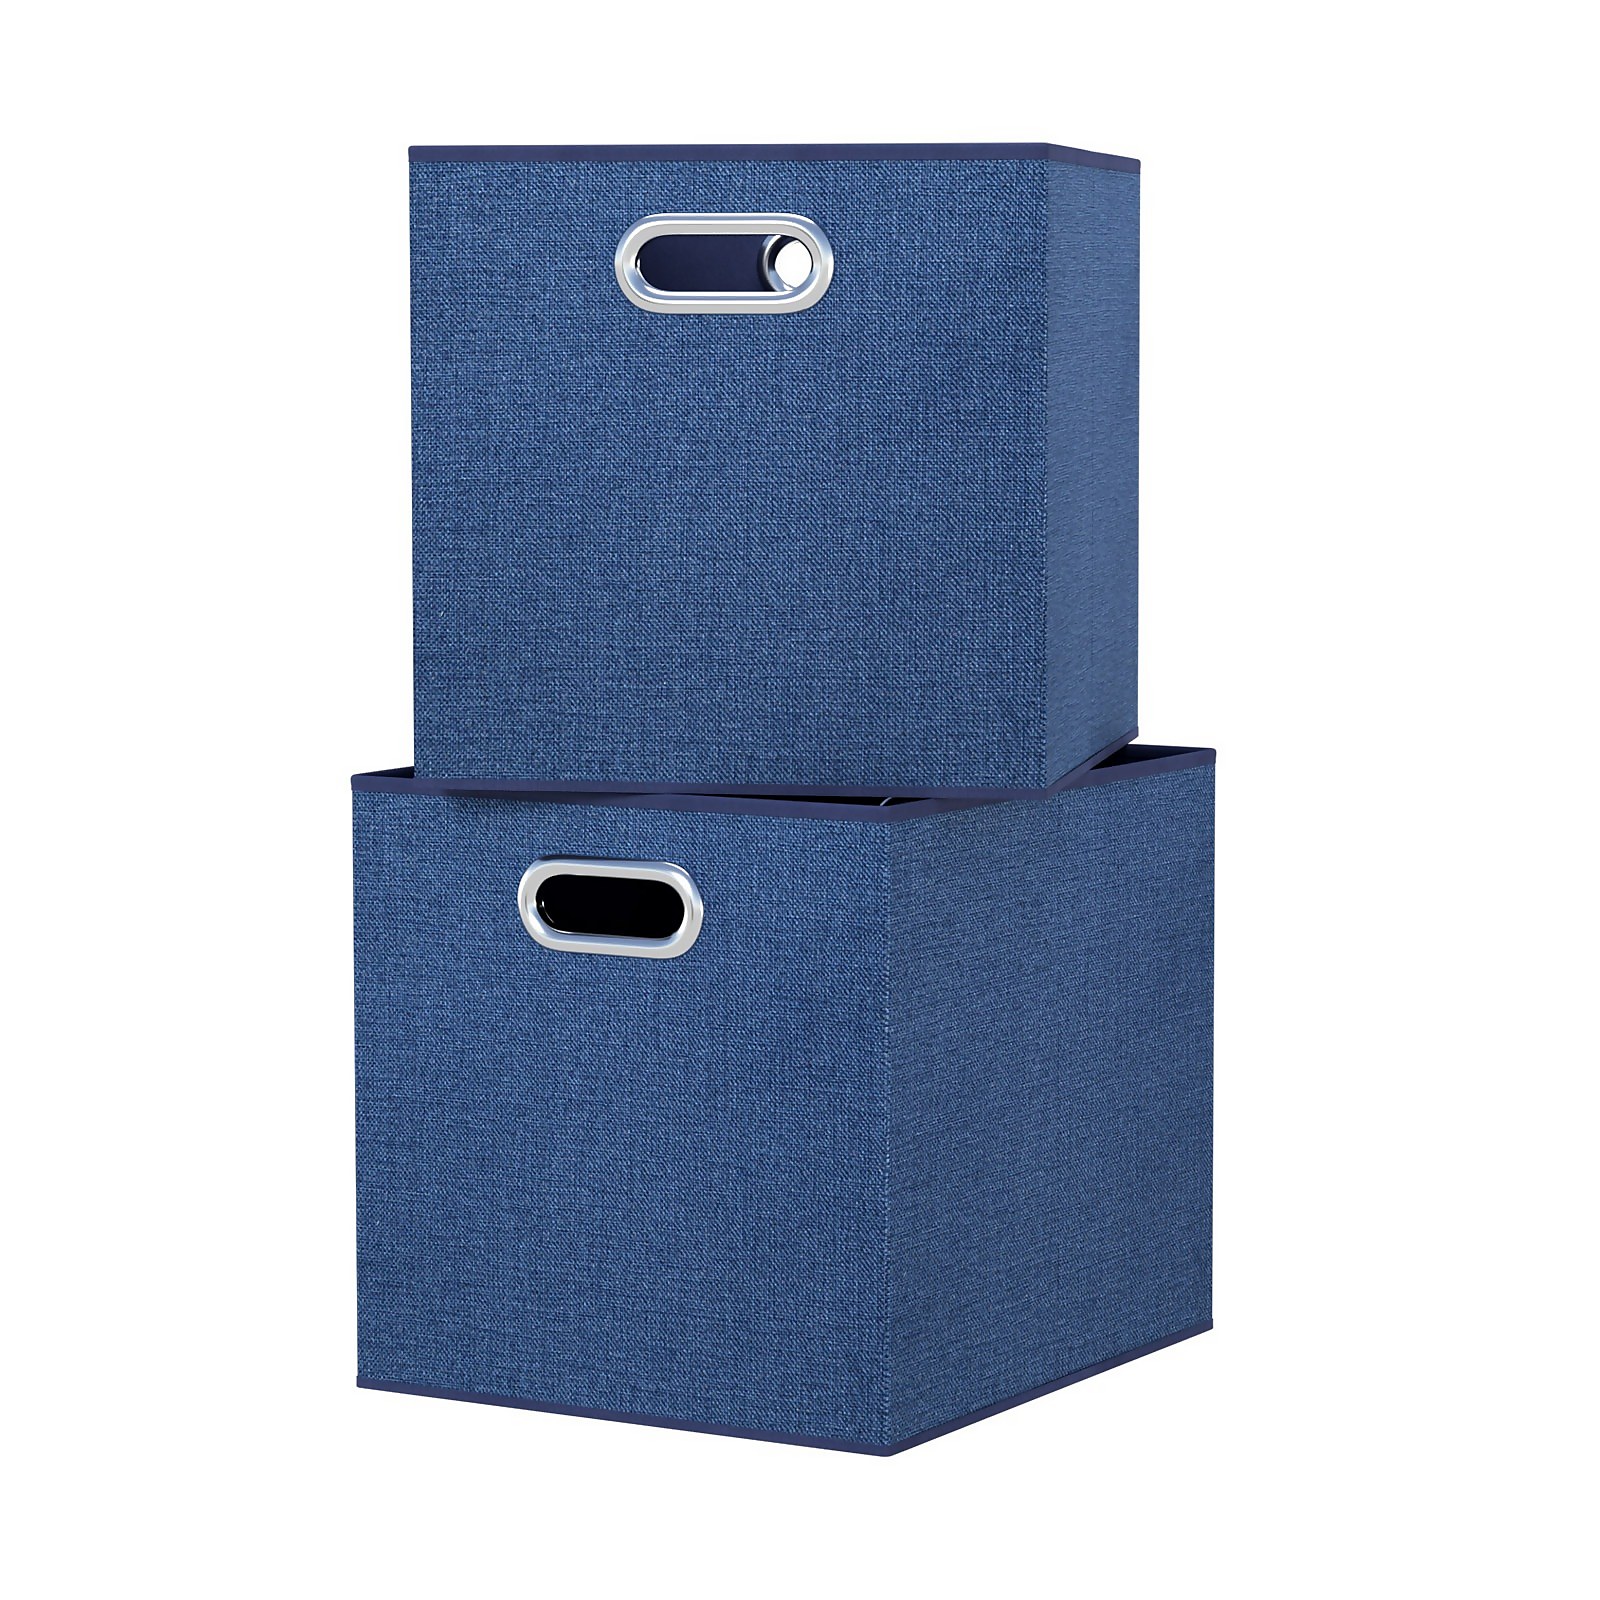 Photo of Clever Cube Fabric Insert - Set Of 2 - Steel Blue